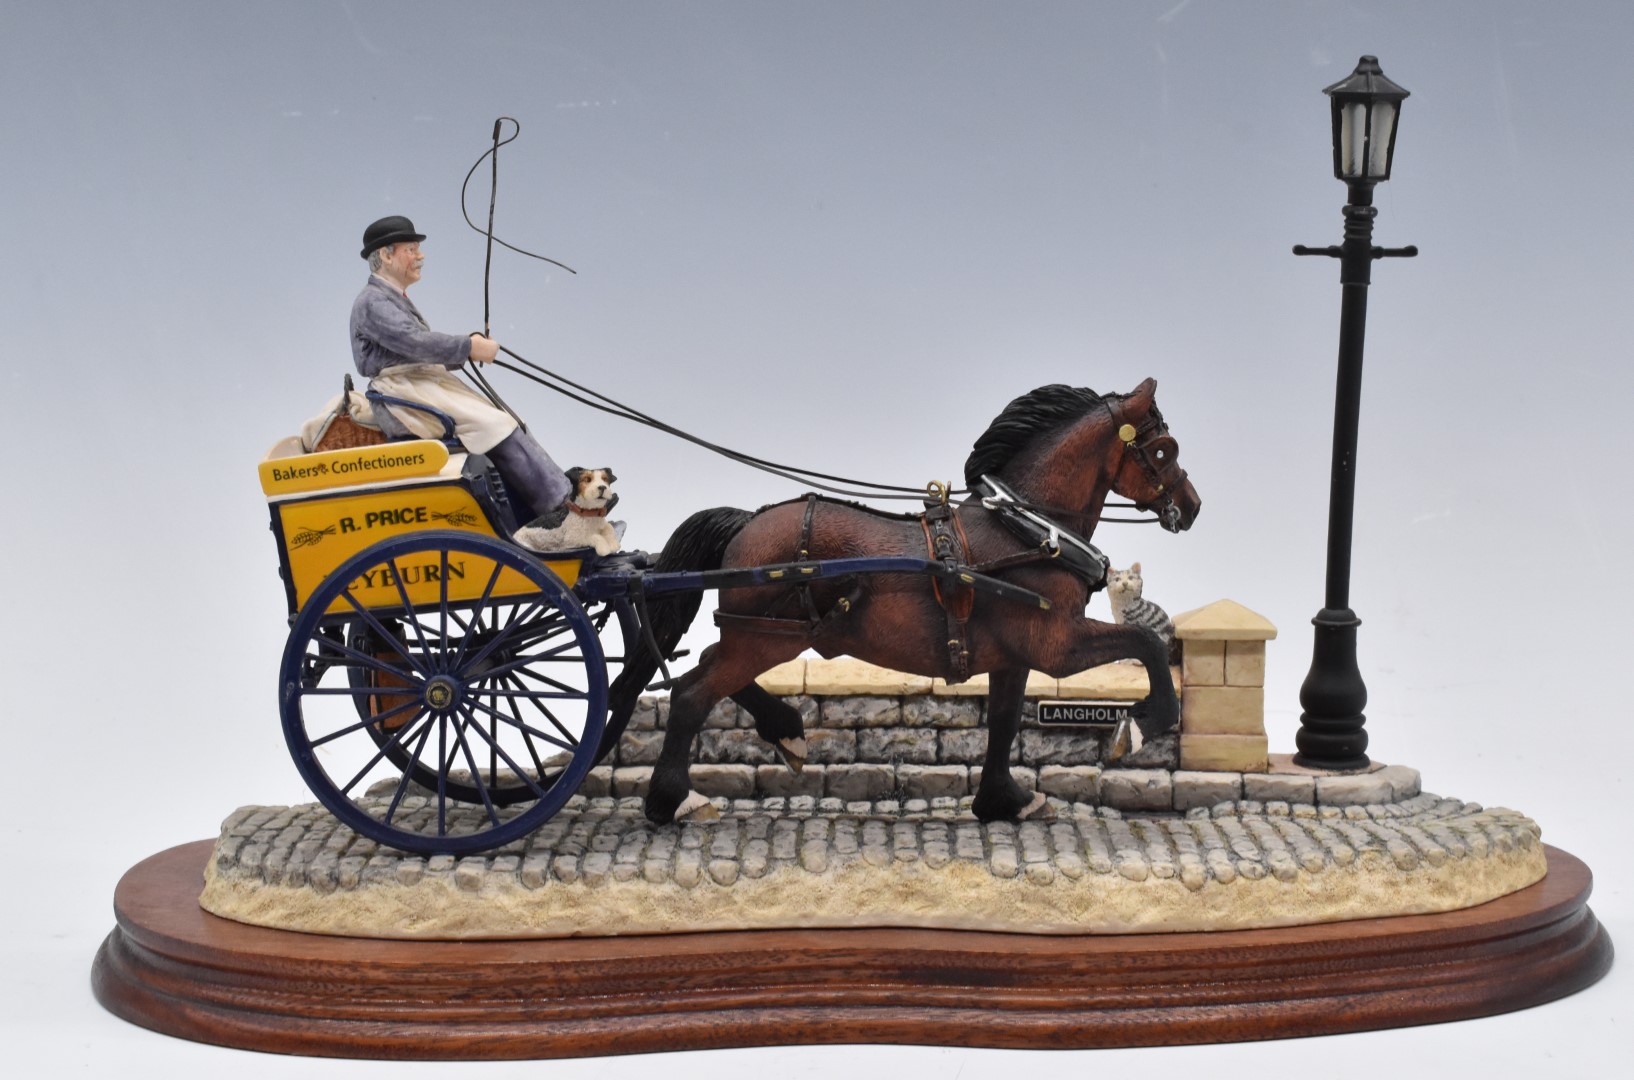 Border Fine Arts limited edition 259/1500 'R Price, Leyburn, Bakers and Confectioners' pony and trap